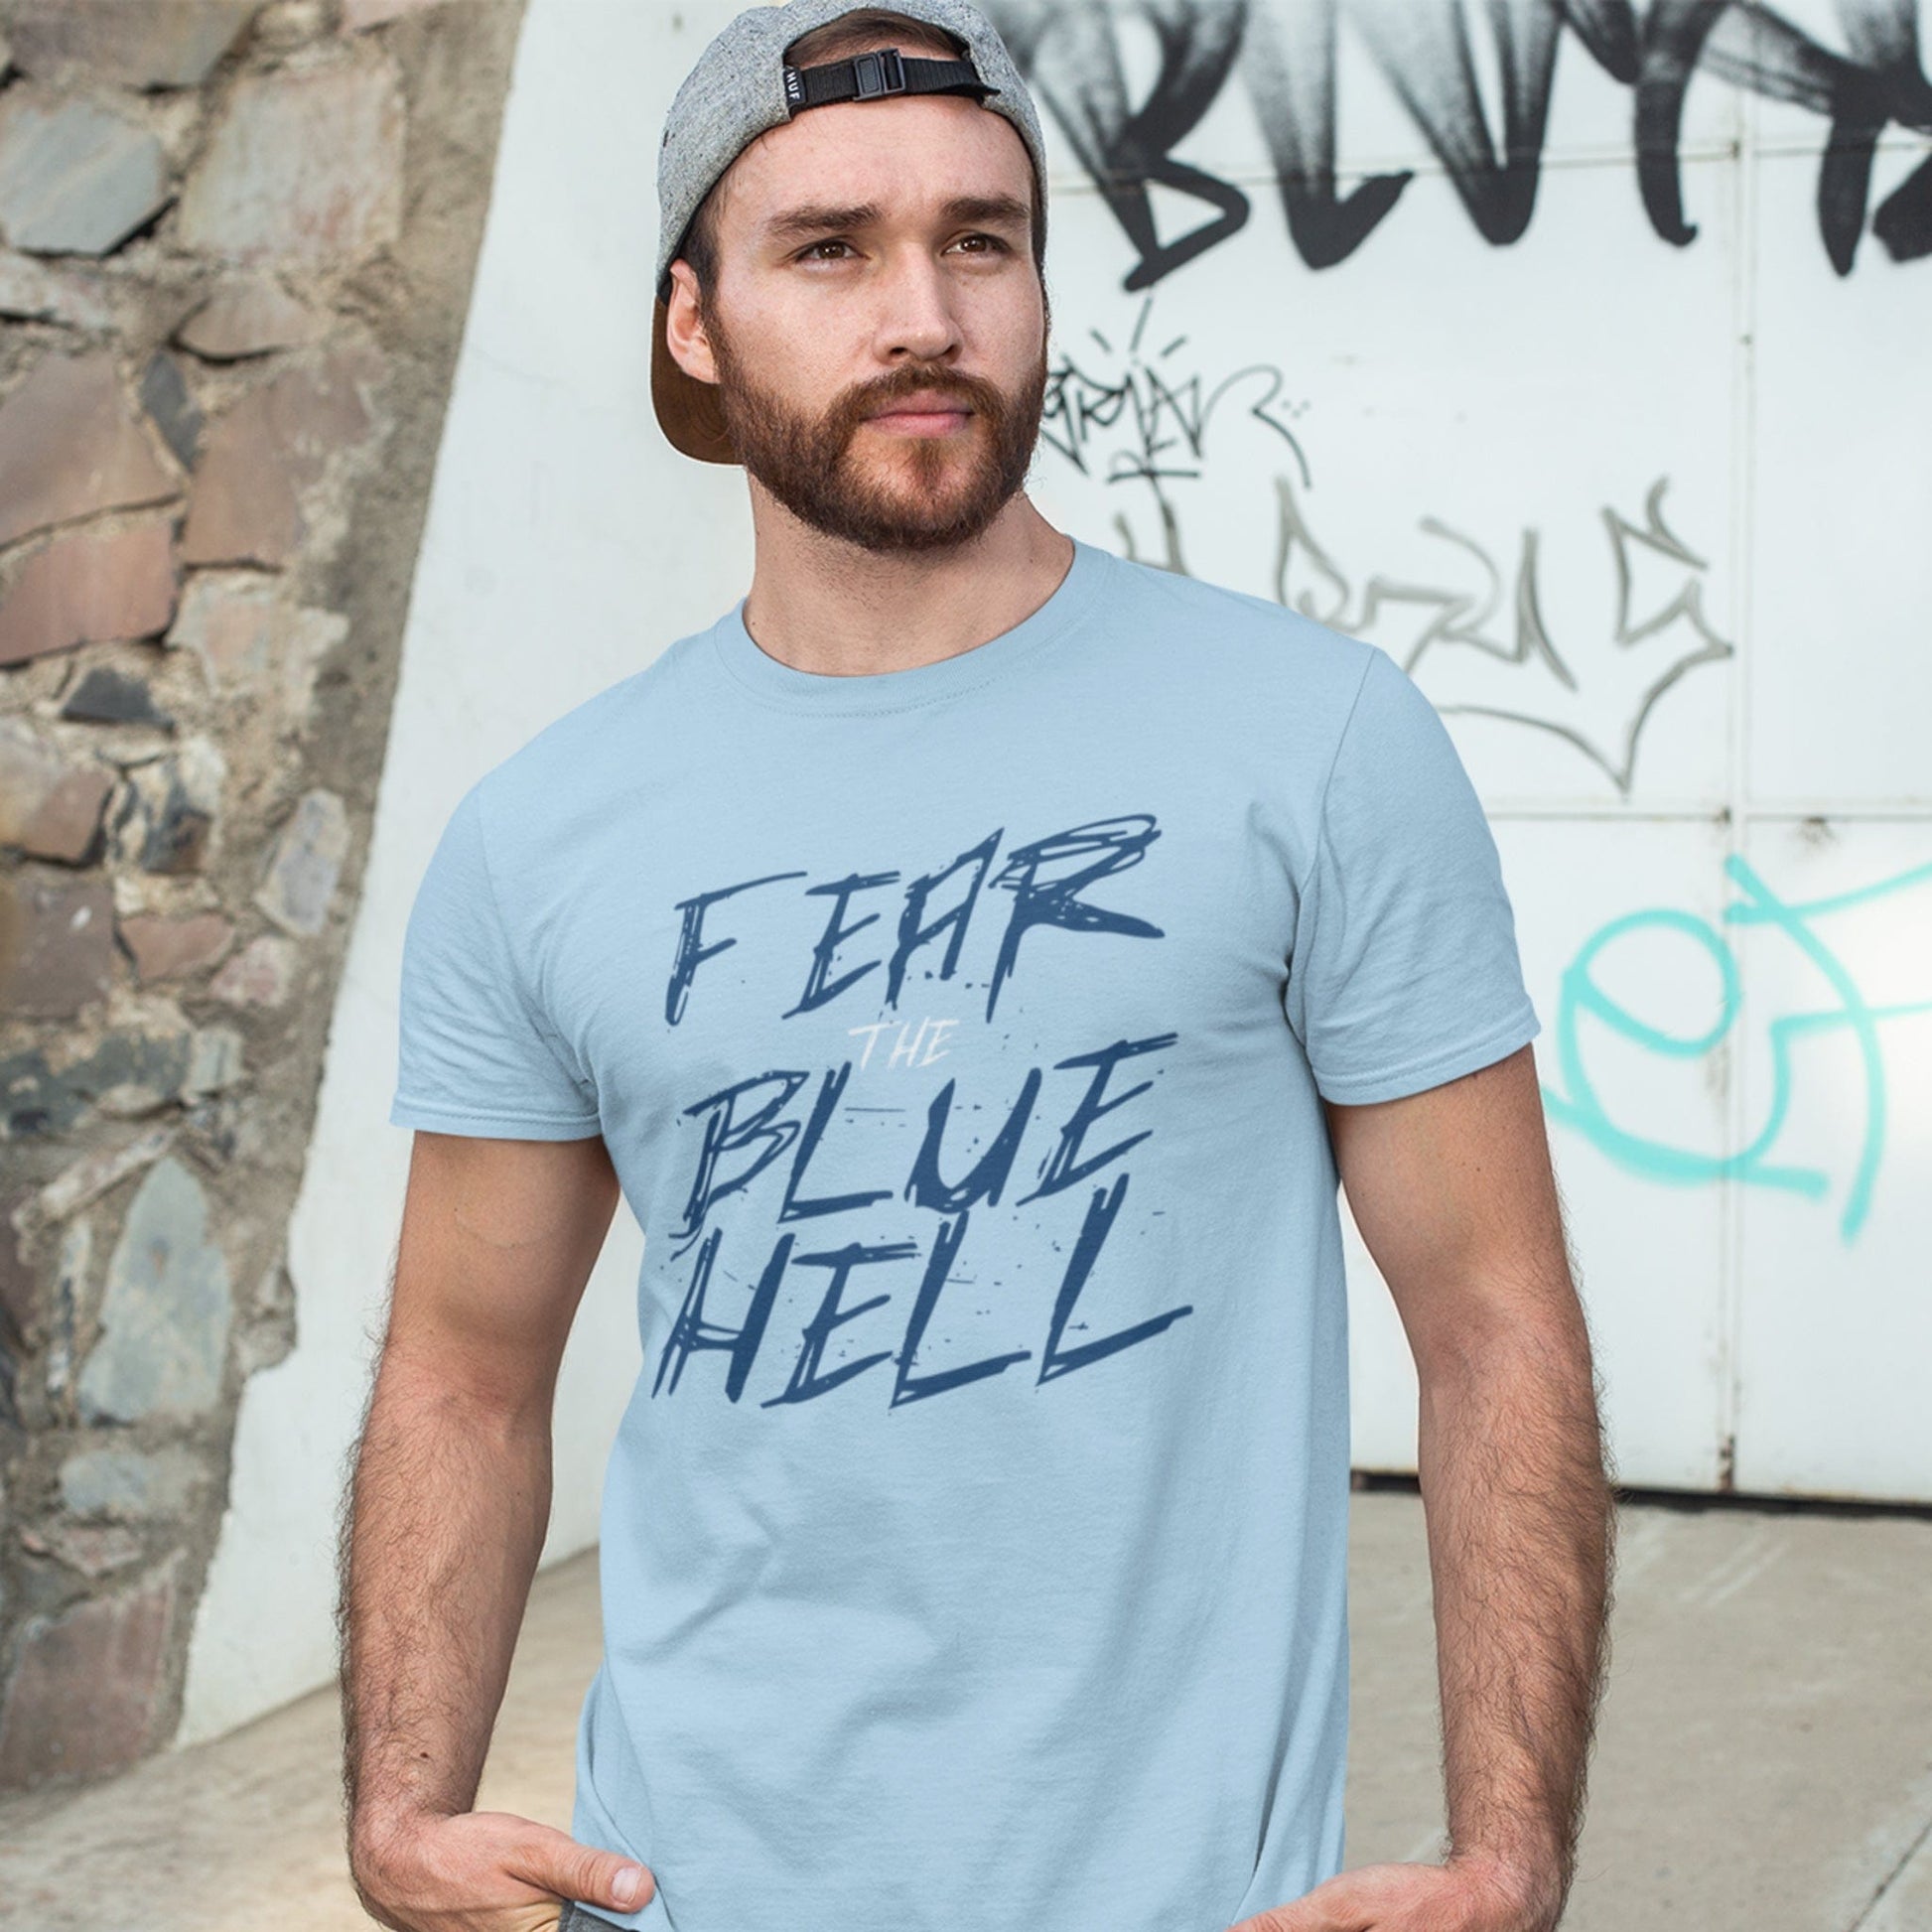 KC Swag Sporting Kansas City navy blue white FEAR THE BLUE HELL on light blue t-shirt worn by male model wearing hat in front of graffiti wall